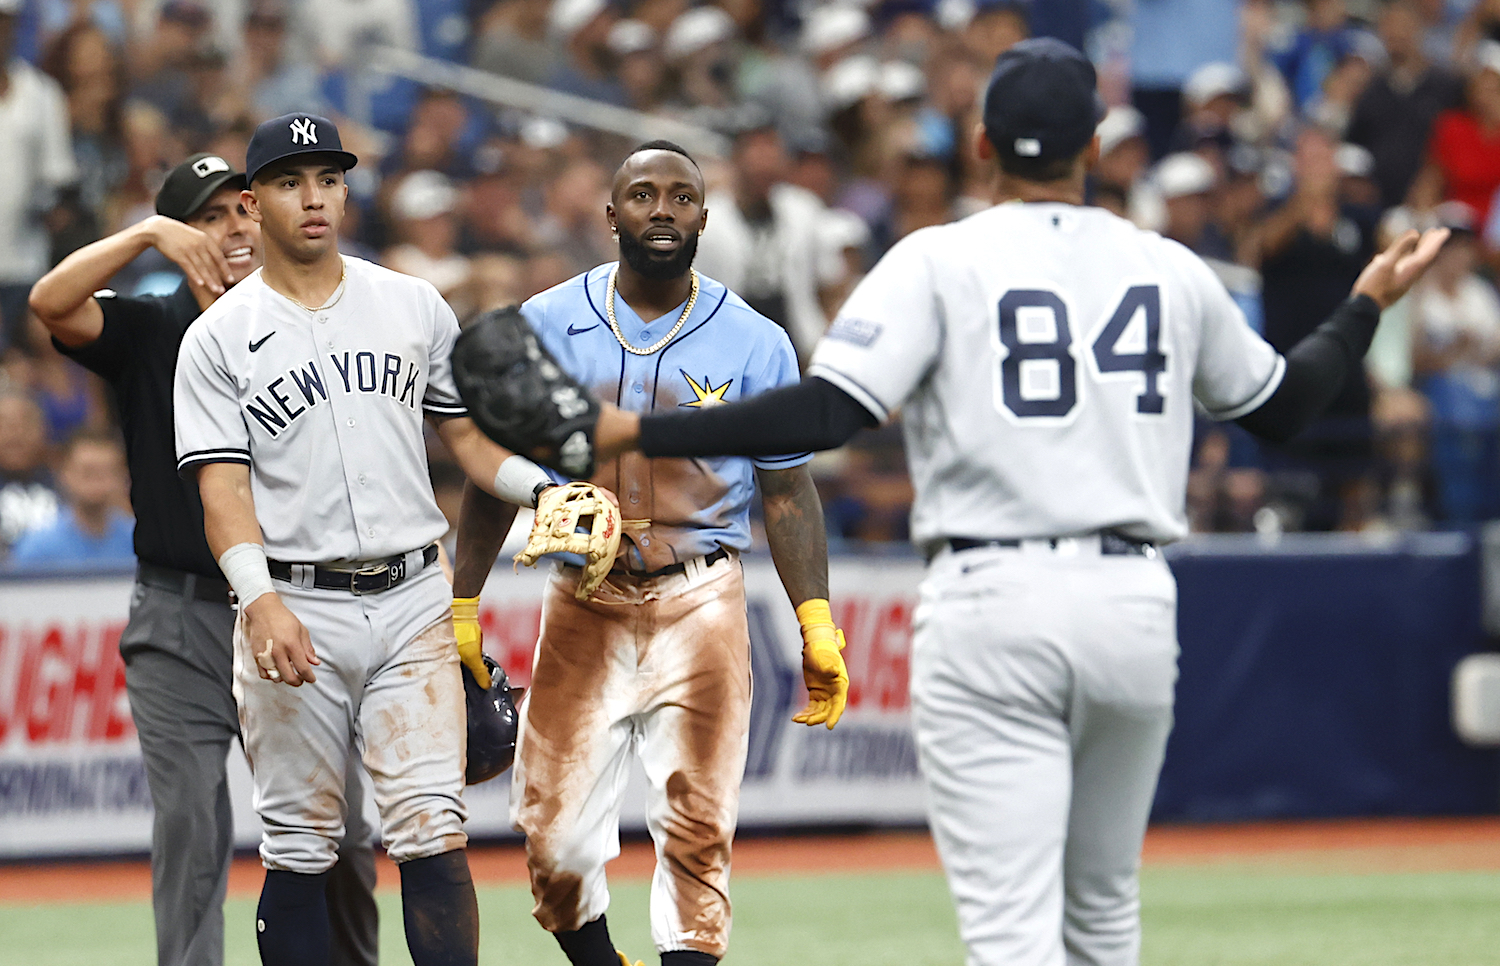 Tropicana Field ground rules, explained: Why home runs count when